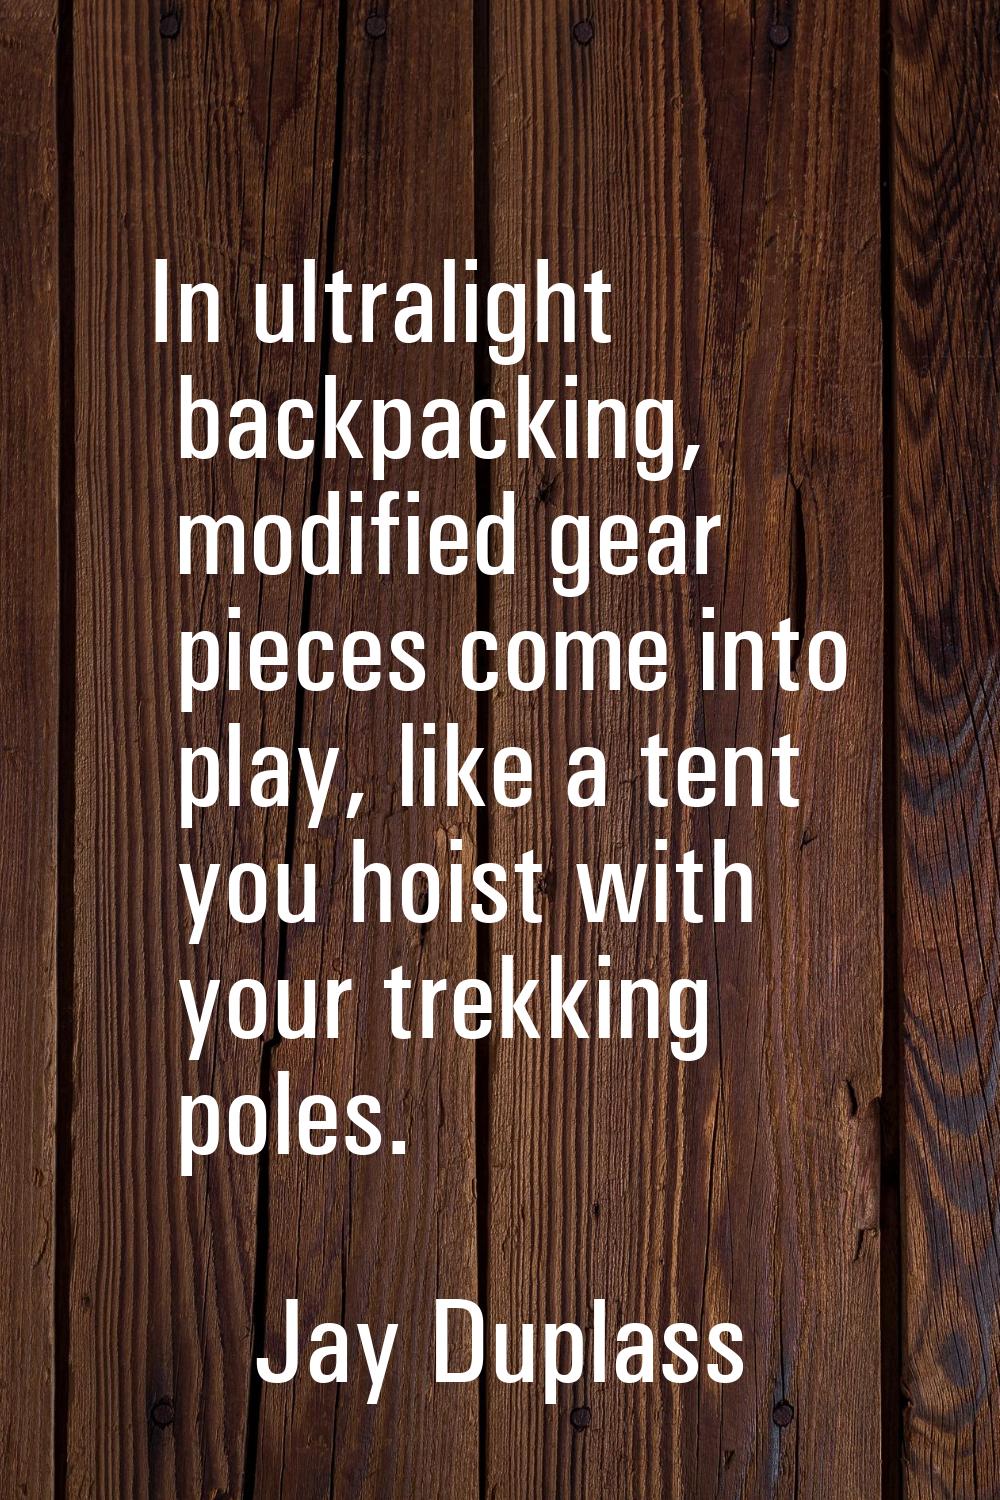 In ultralight backpacking, modified gear pieces come into play, like a tent you hoist with your tre